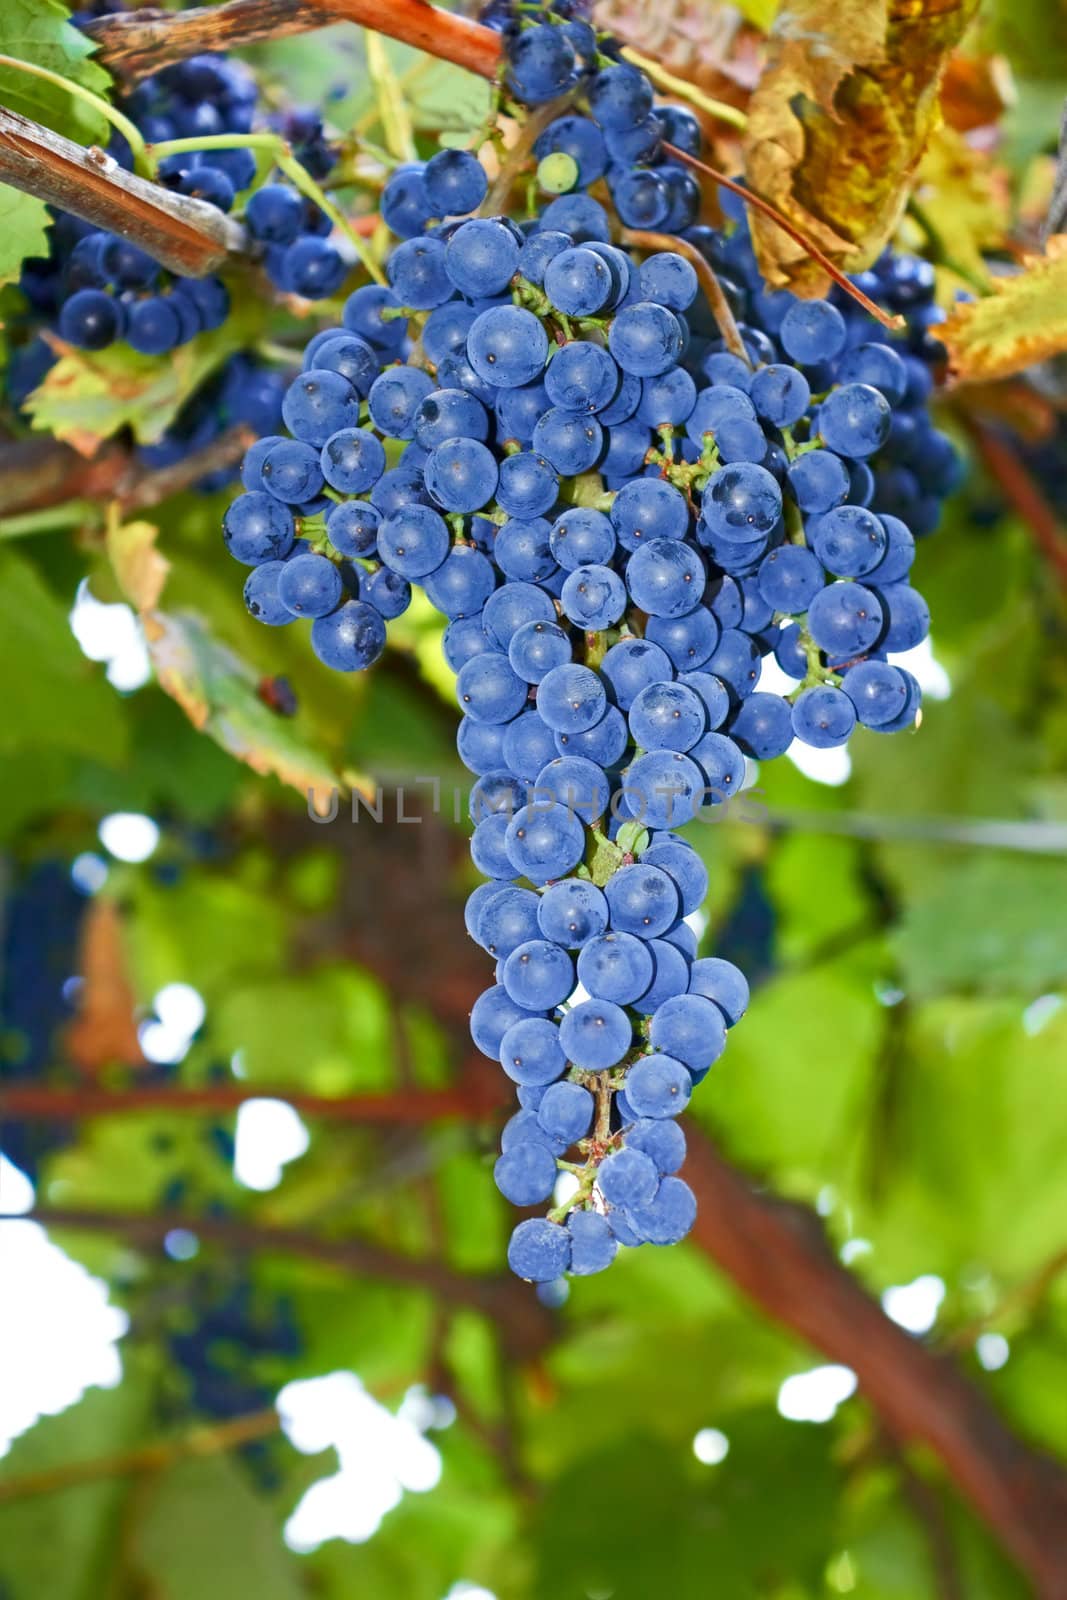 Bunches of blue ripe grapes by qiiip